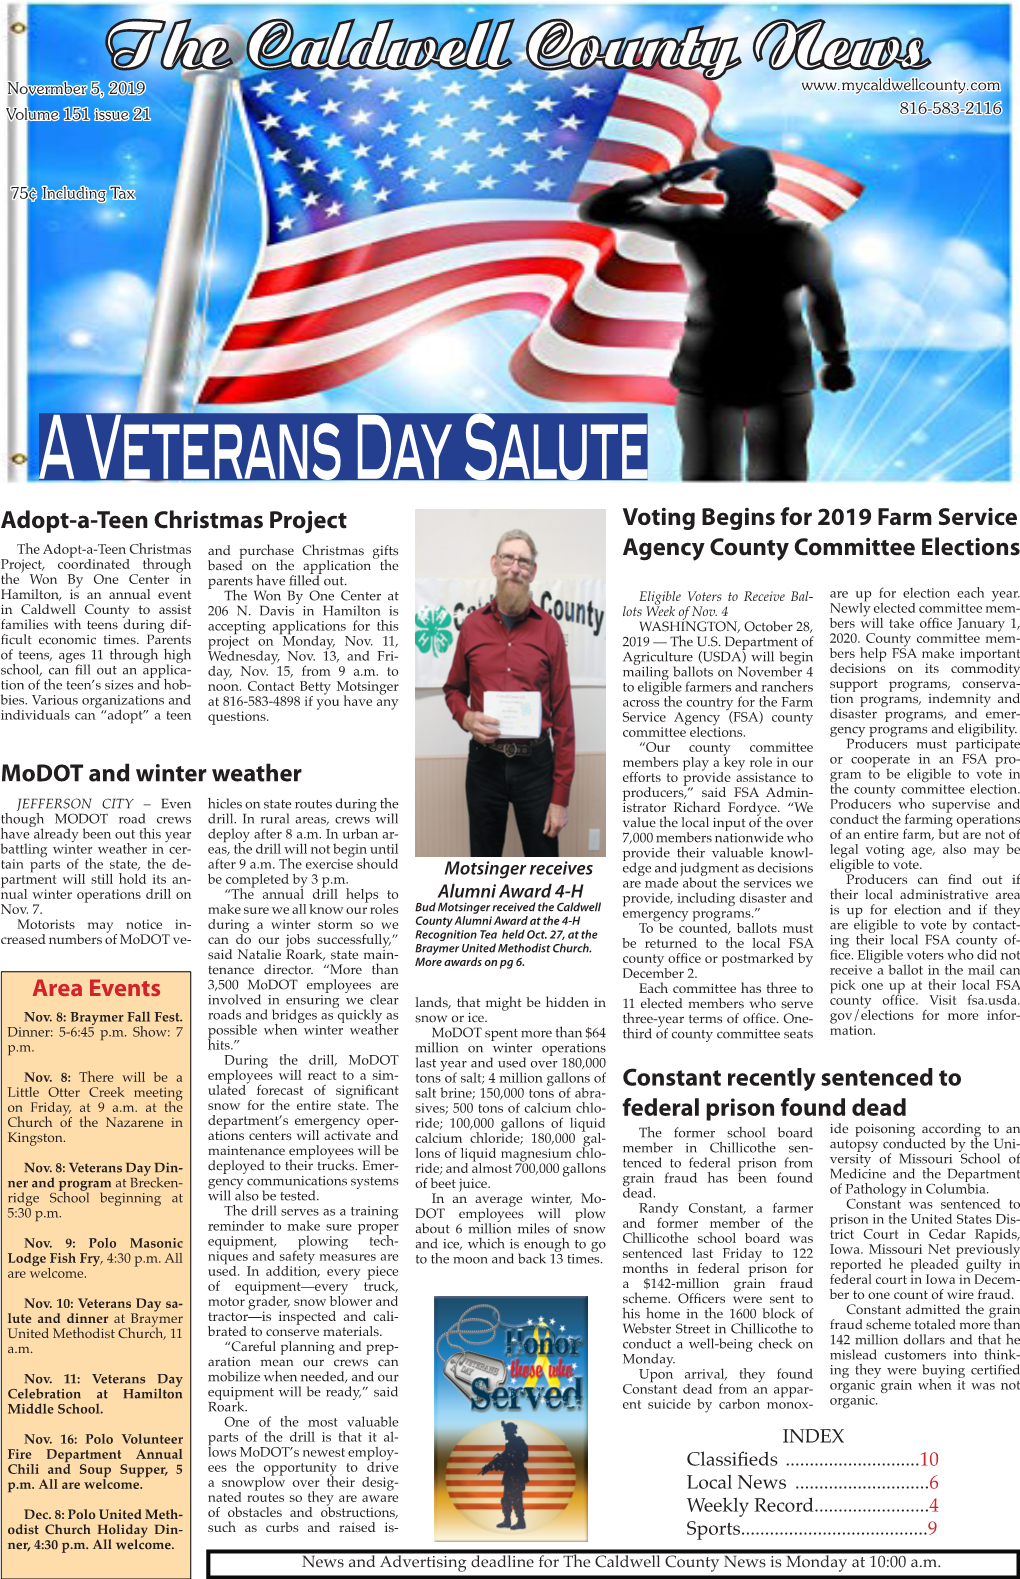 The Caldwell County News Novermber 5, 2019 Volume 151 Issue 21 816-583-2116